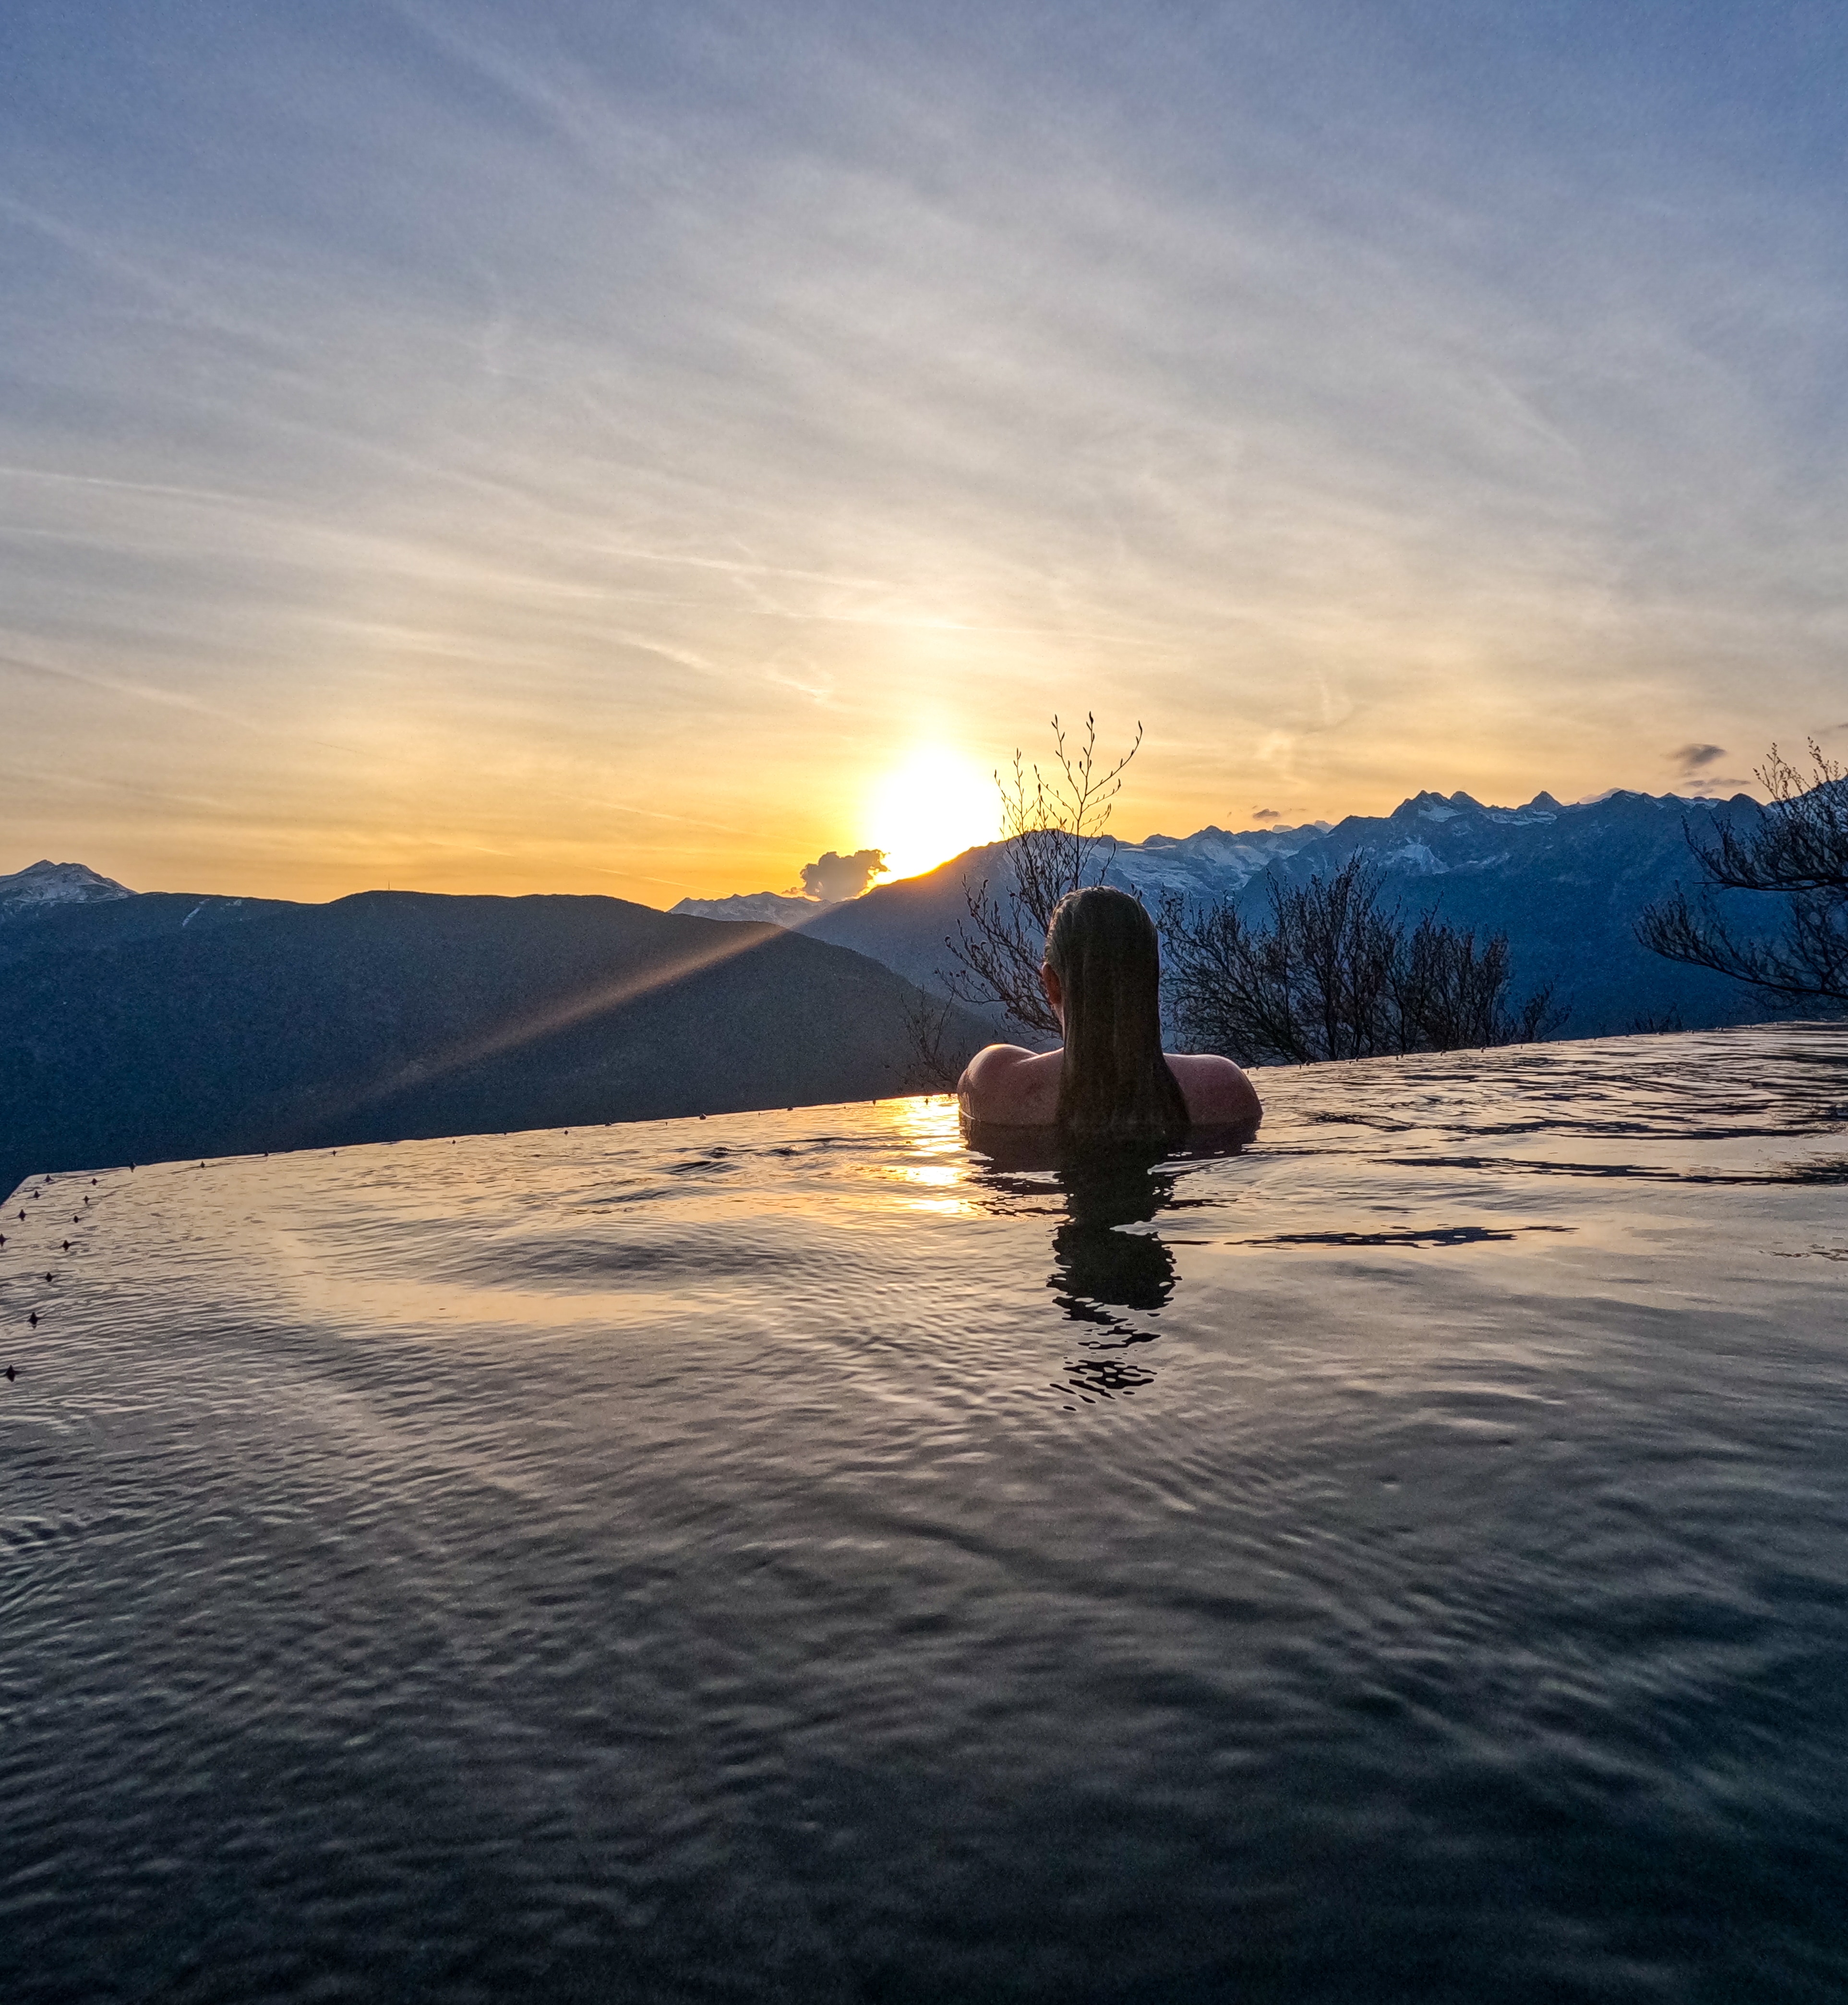 miramonti boutique hotel italy infinity pool at sunset